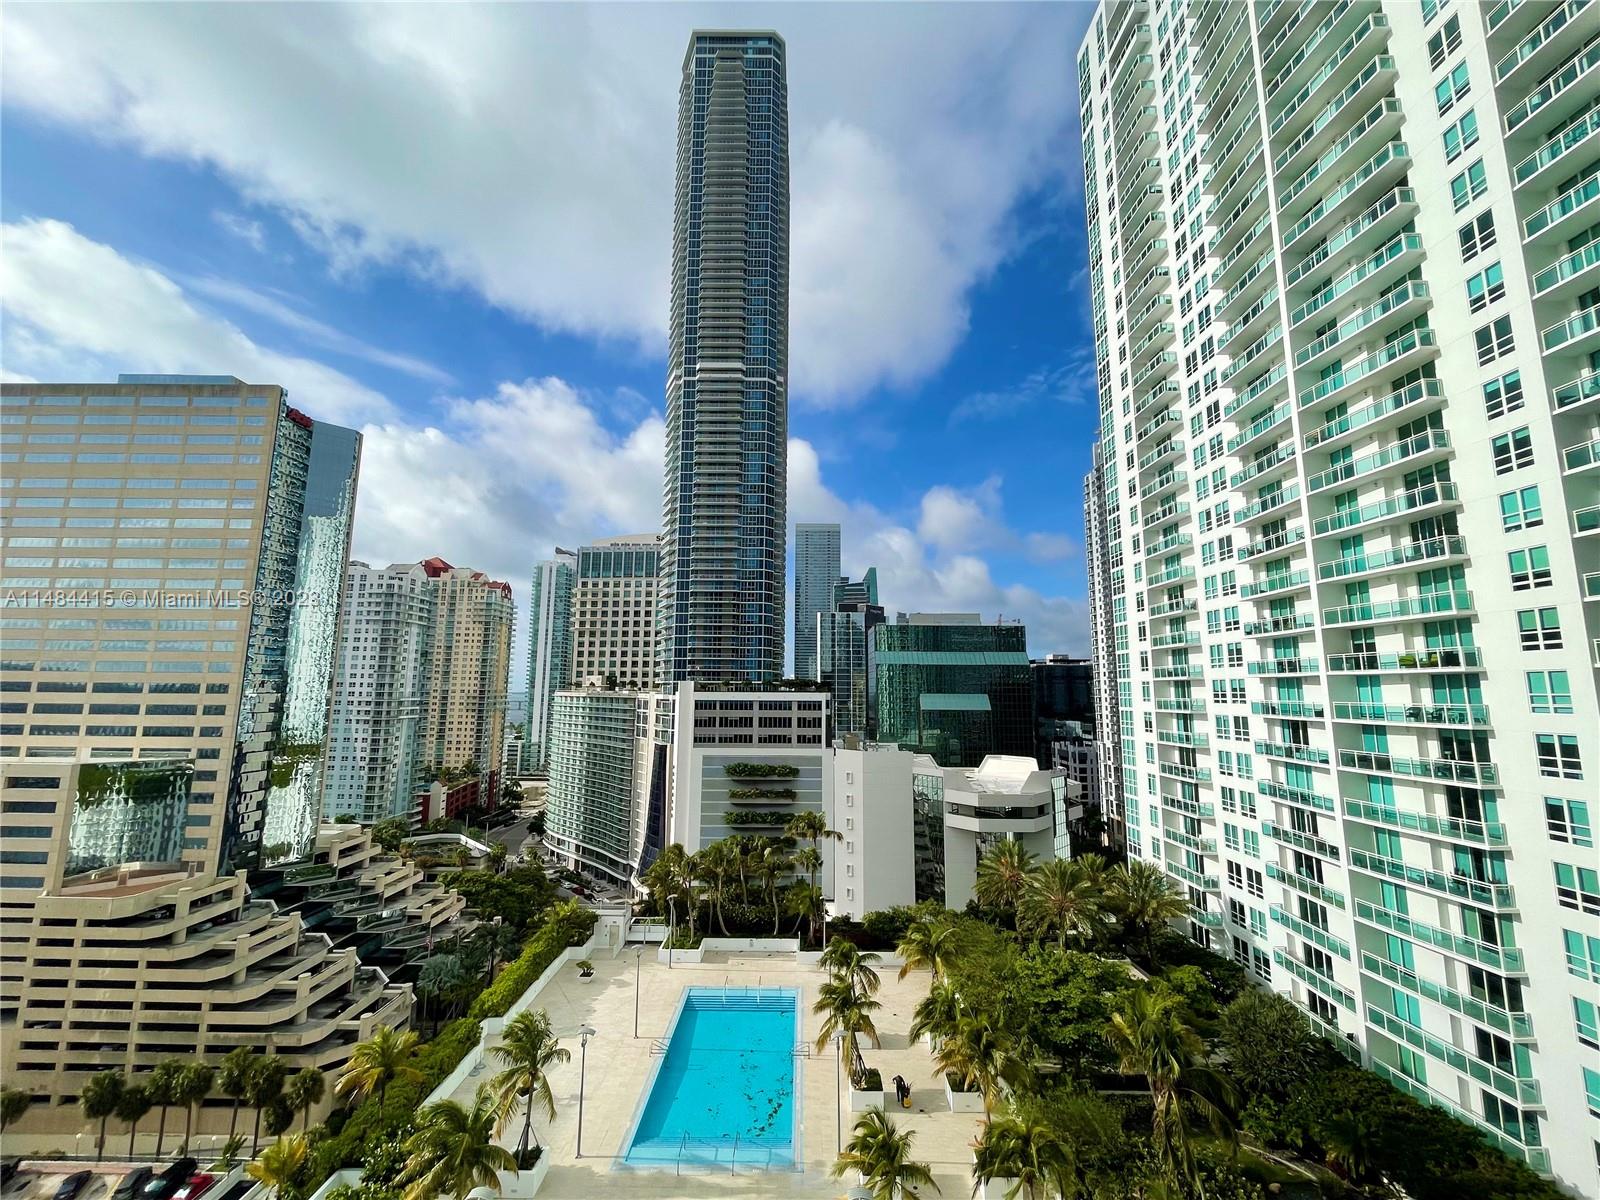 Rarely available Line 07- 2 Bedroom, 2 Bathroom with split floor plan, spacious living room and expanded balcony at the Plaza in the heart of Brickell. Stainless steel appliances with tile flooring throughout. Master Bedroom includes walk in closets and his/her sinks with shower and bath tub. Washer/Dryer in unit. 1 assigned parking space included. Amenities:24-hours security and concierge, 24-hour valet parking, state-of-the-art fitness center in each tower, 2 infinity-edge heated pools, steam room, theater room, business center, party room, pool table & lounge. Walking distance to all restaurants, grocery store, Brickell City Center mall and Mary Brickell Village. 1 year lease only.